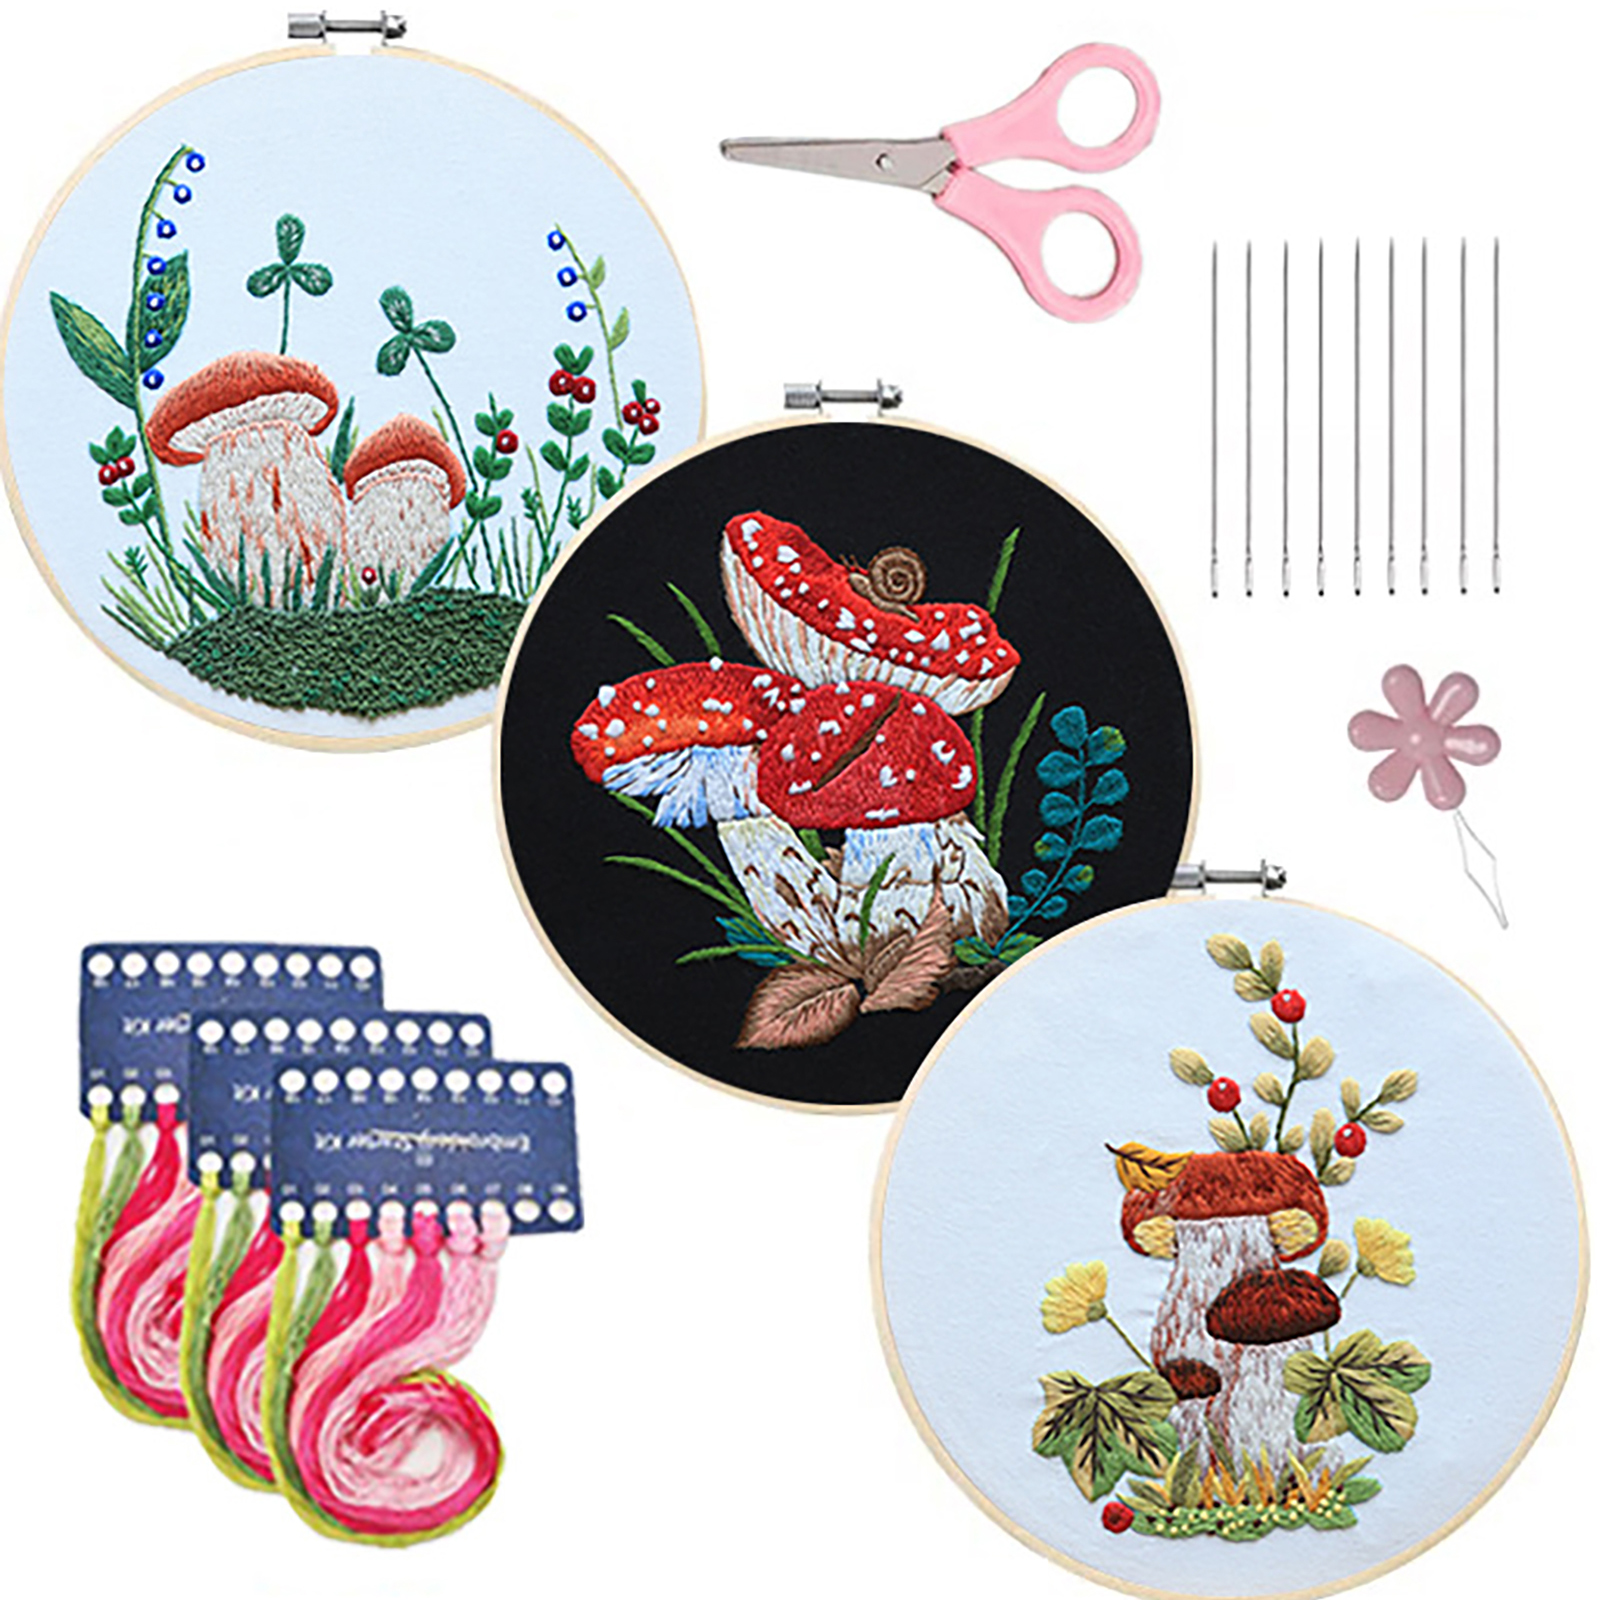 Embroidery Starter Kit With Embroidery Hoops Scissors Needle Threader Colorful Mushrooms Pattern Cross Stitch Starter Kits